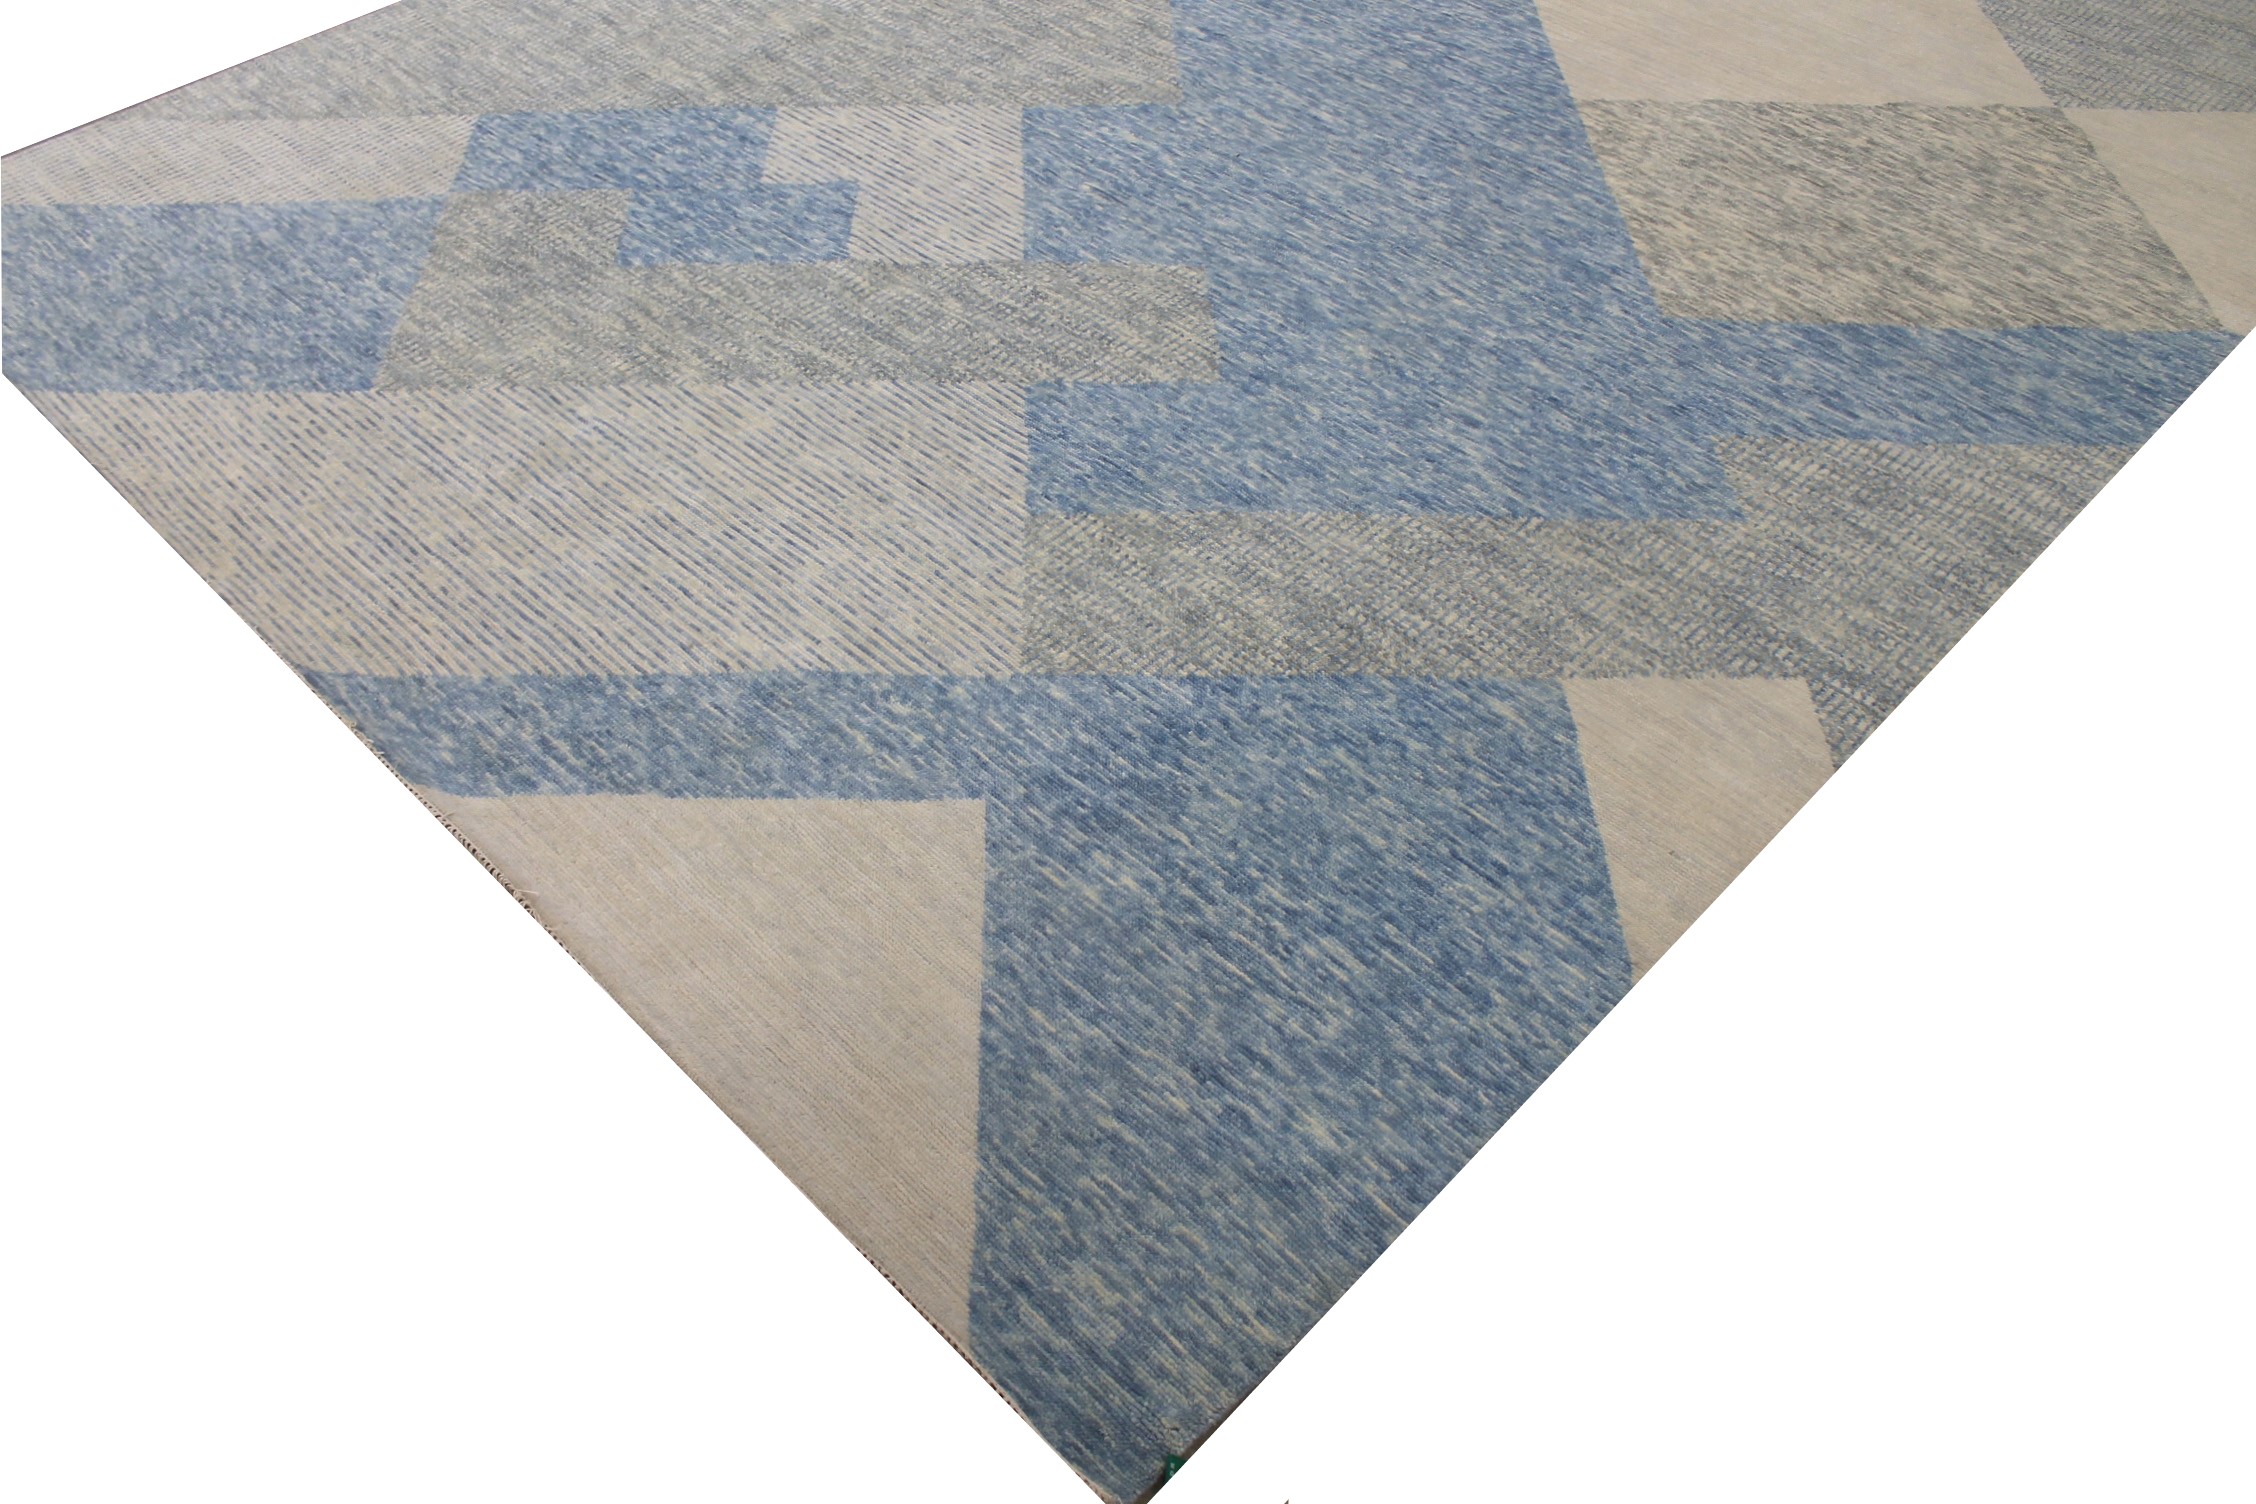 Contemporary & Modern Rugs EDGE 027544 Lt. Grey - Grey & Lt. Blue - Blue Hand Knotted Rug